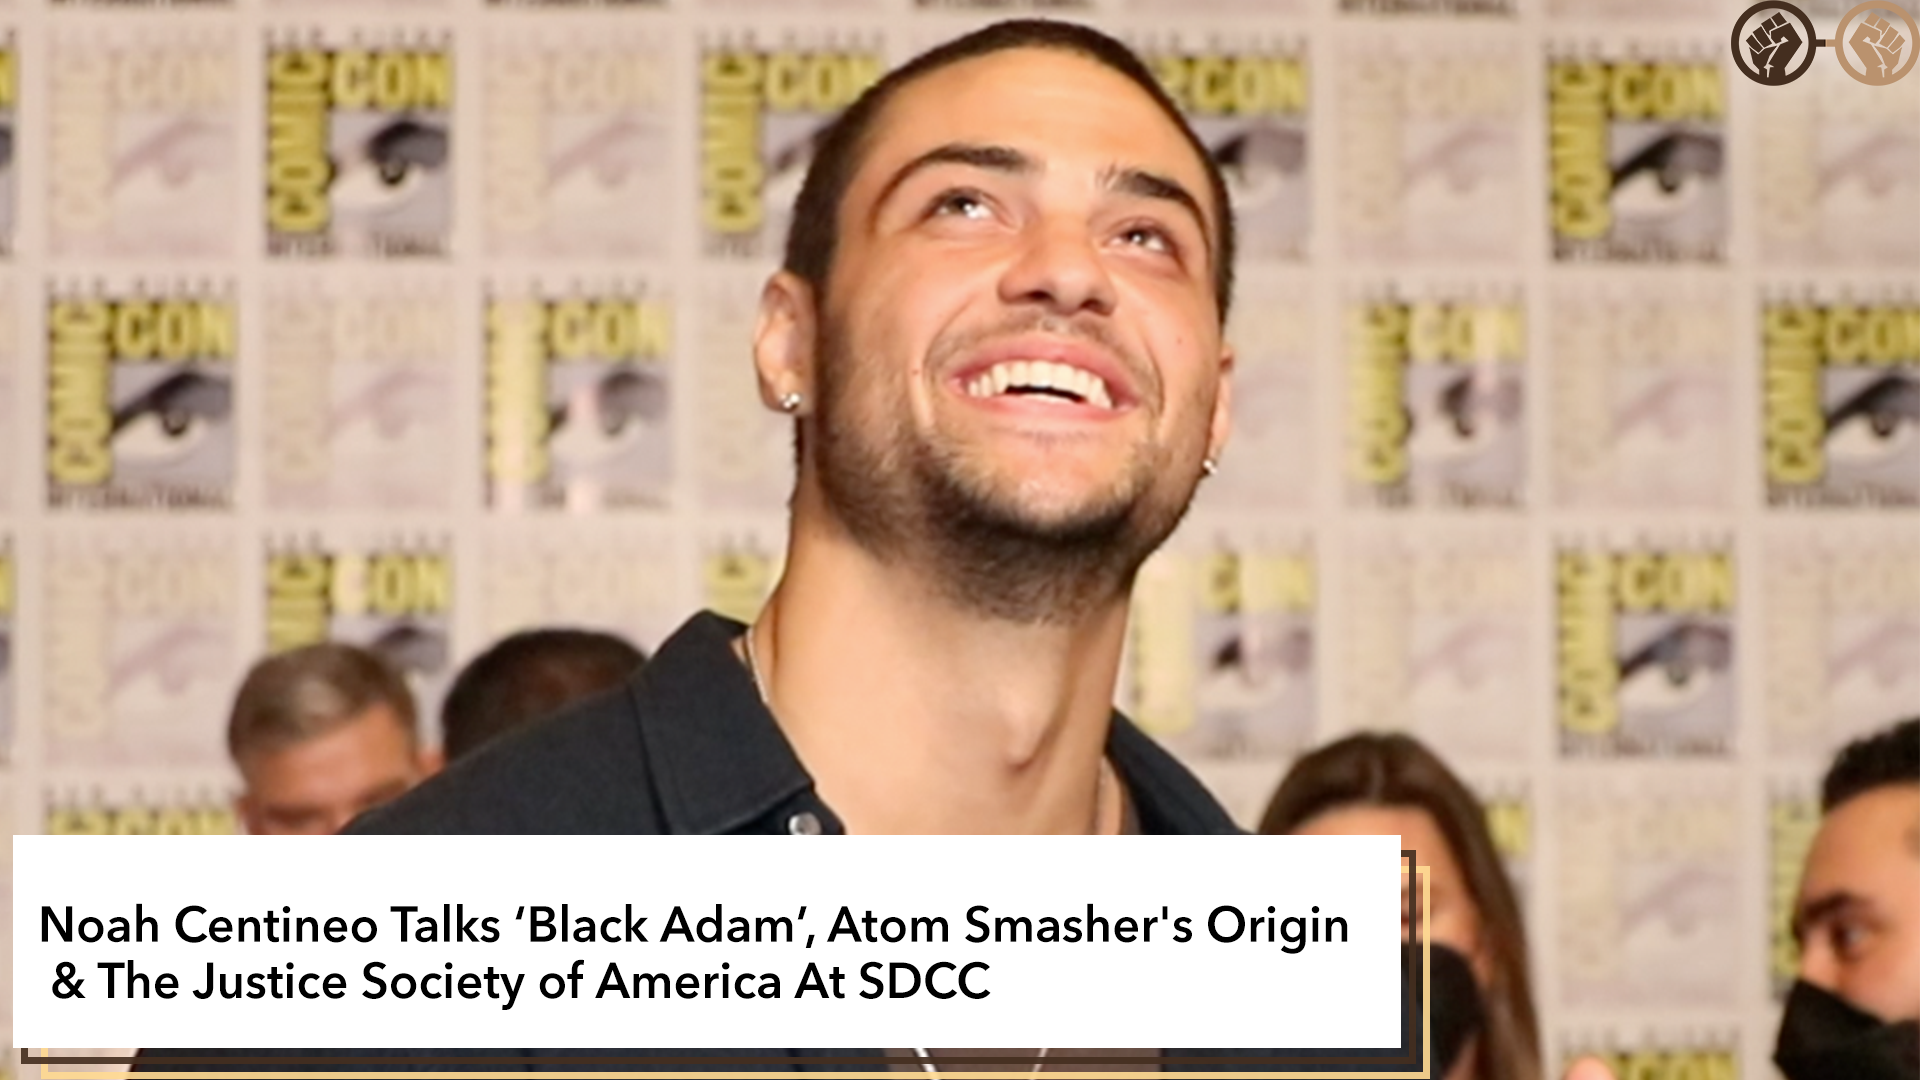 Interview: Noah Centineo Talks ‘Black Adam’, Atom Smasher’s Origin & The Justice Society of America At SDCC